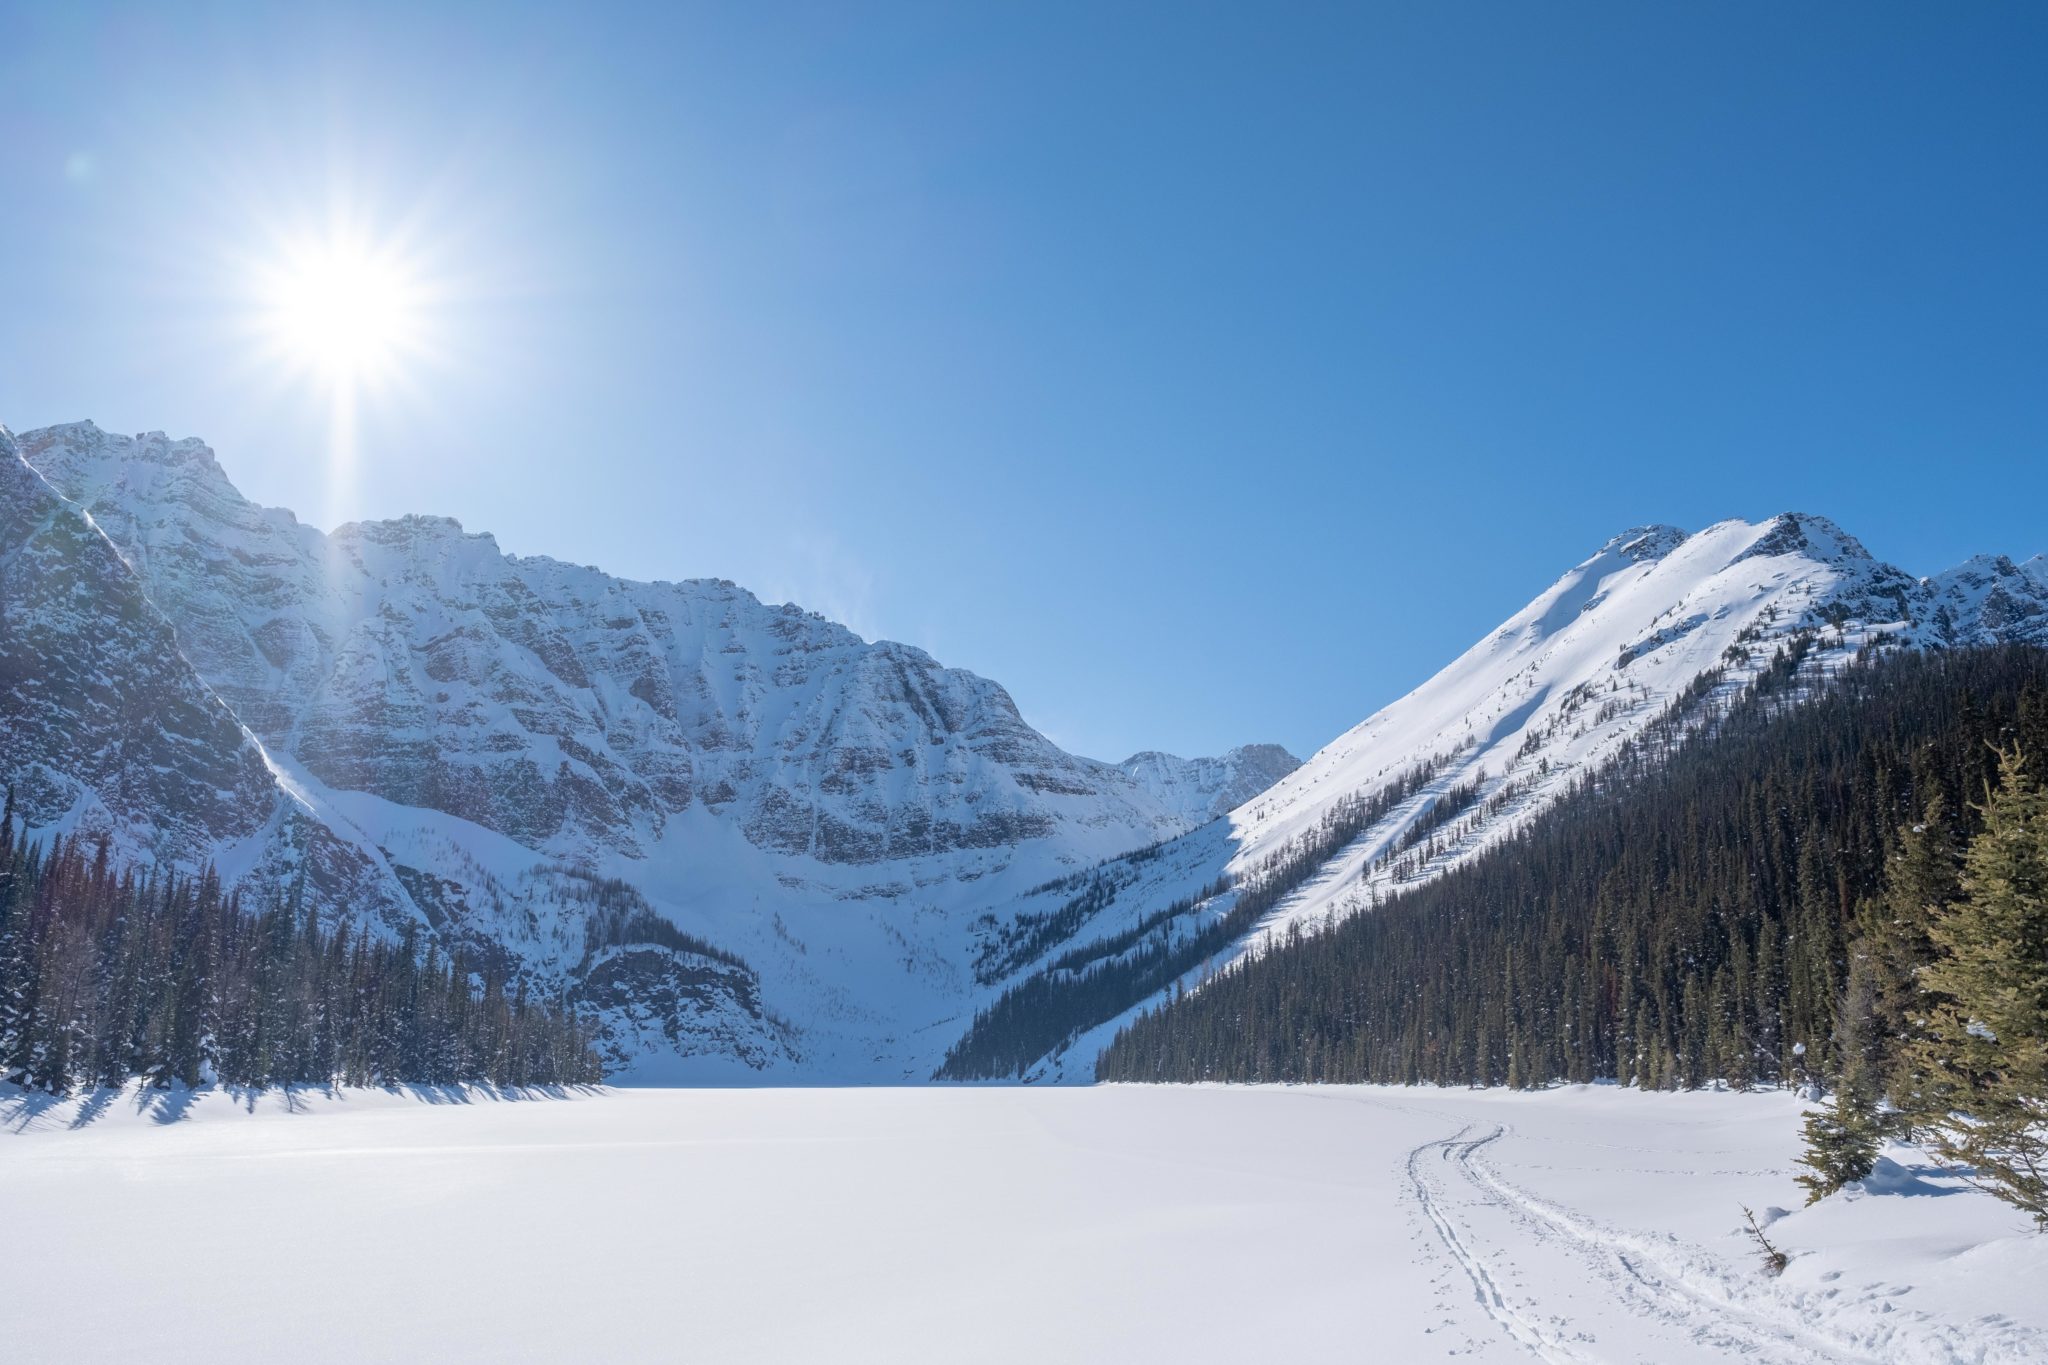 Visiting Banff in March? 10 Helpful Things to Know The Banff Blog